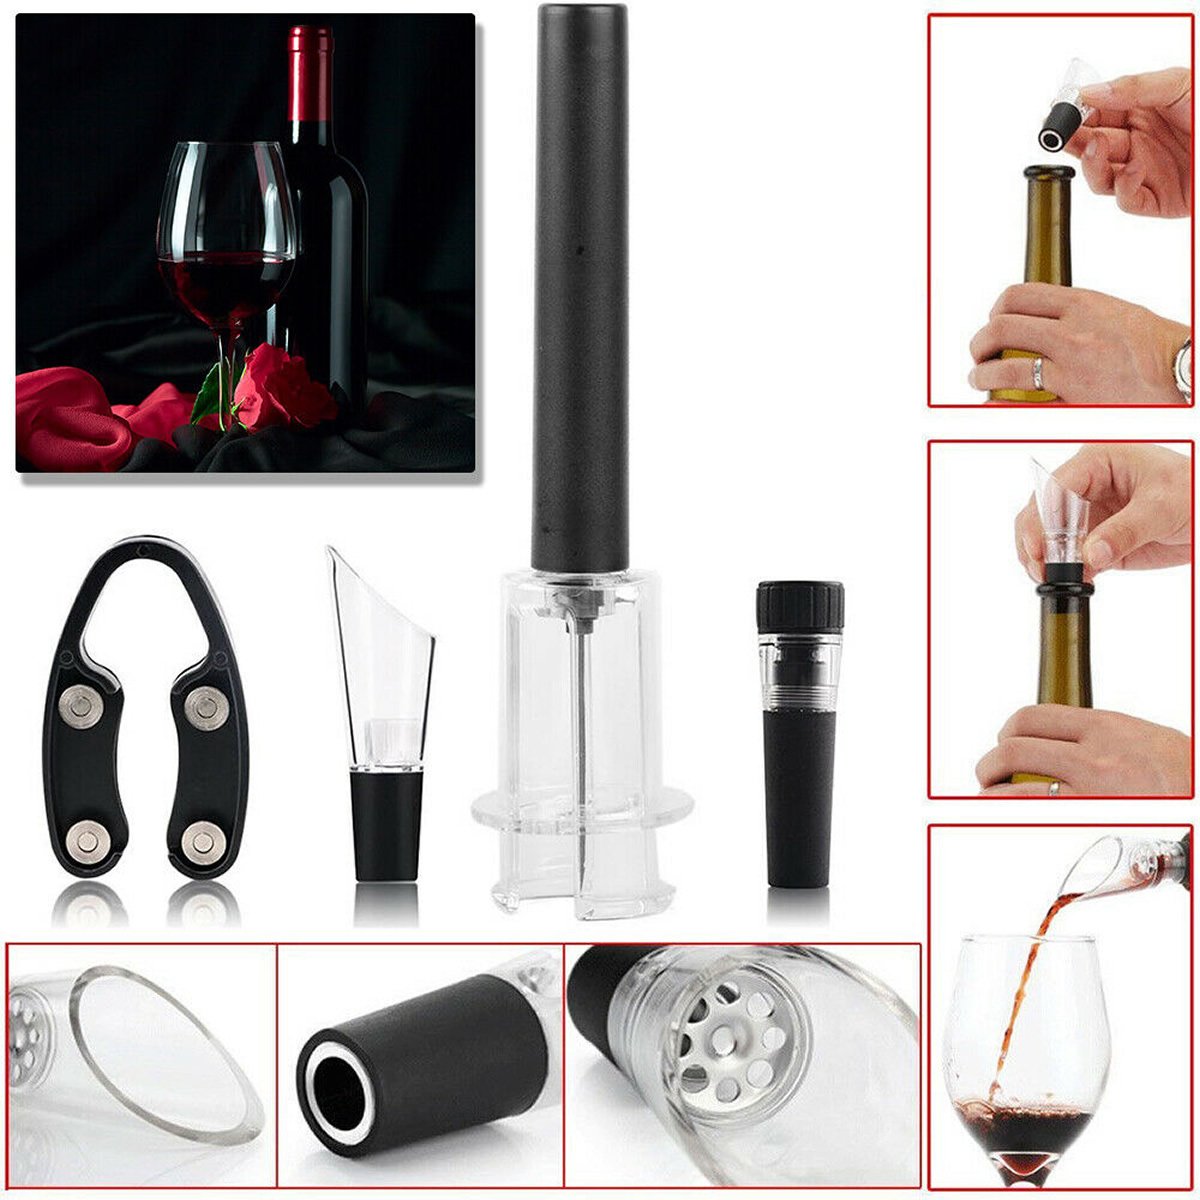 Pour And Preserve Set of 4 Foil Cutter Air Wine Opener Aerator And